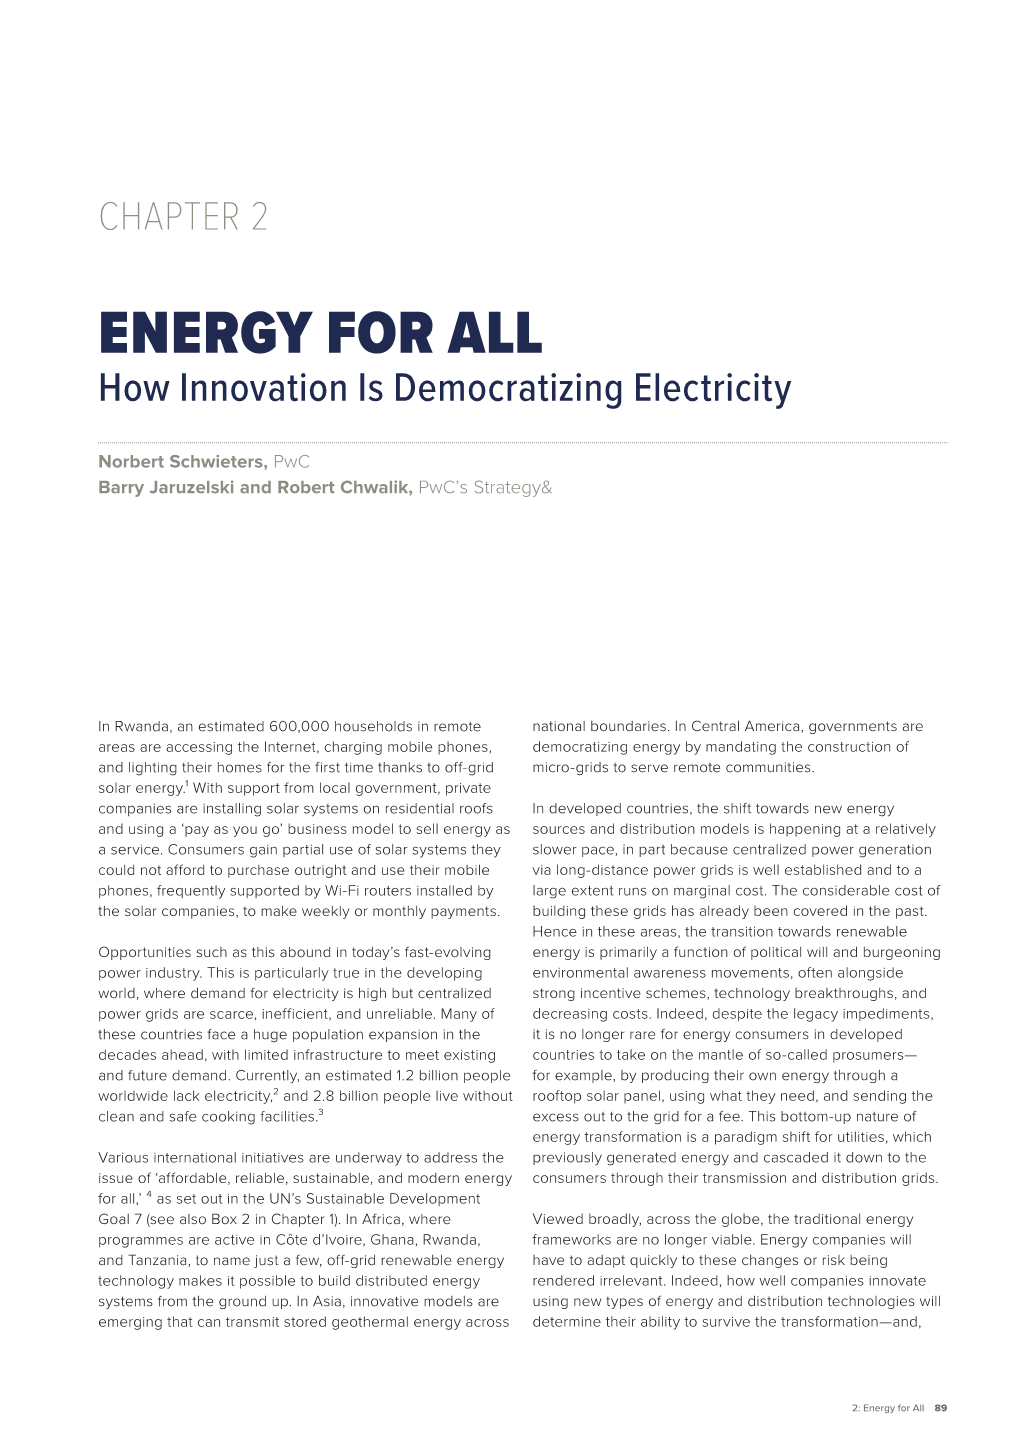 ENERGY for ALL How Innovation Is Democratizing Electricity